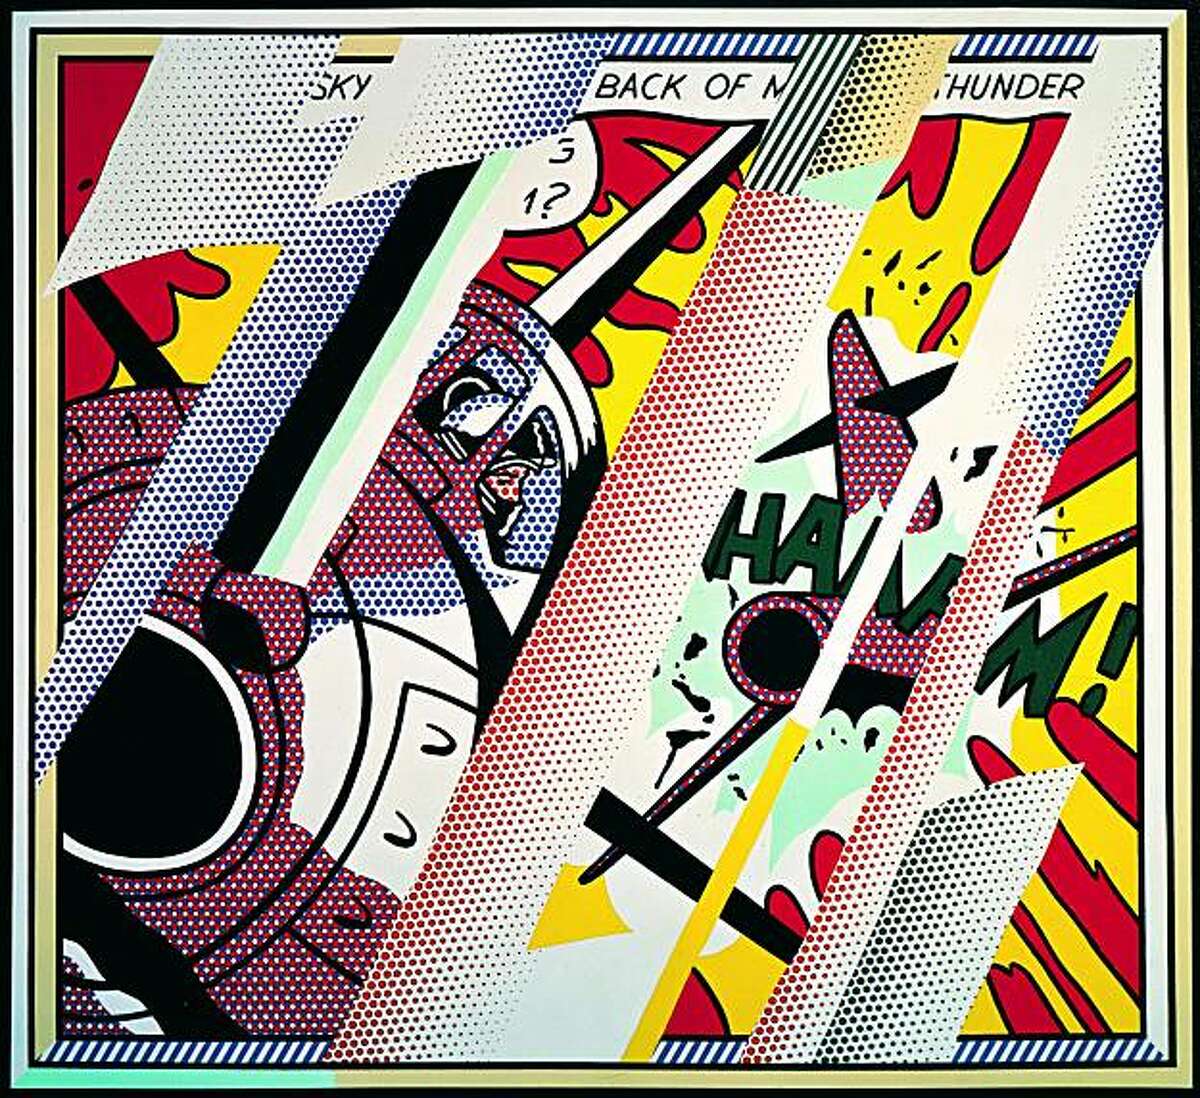 "Reflections: Whaam!" (1990) oil and magna on canvas by Roy Lichtenstein 70.25" x 76.5"